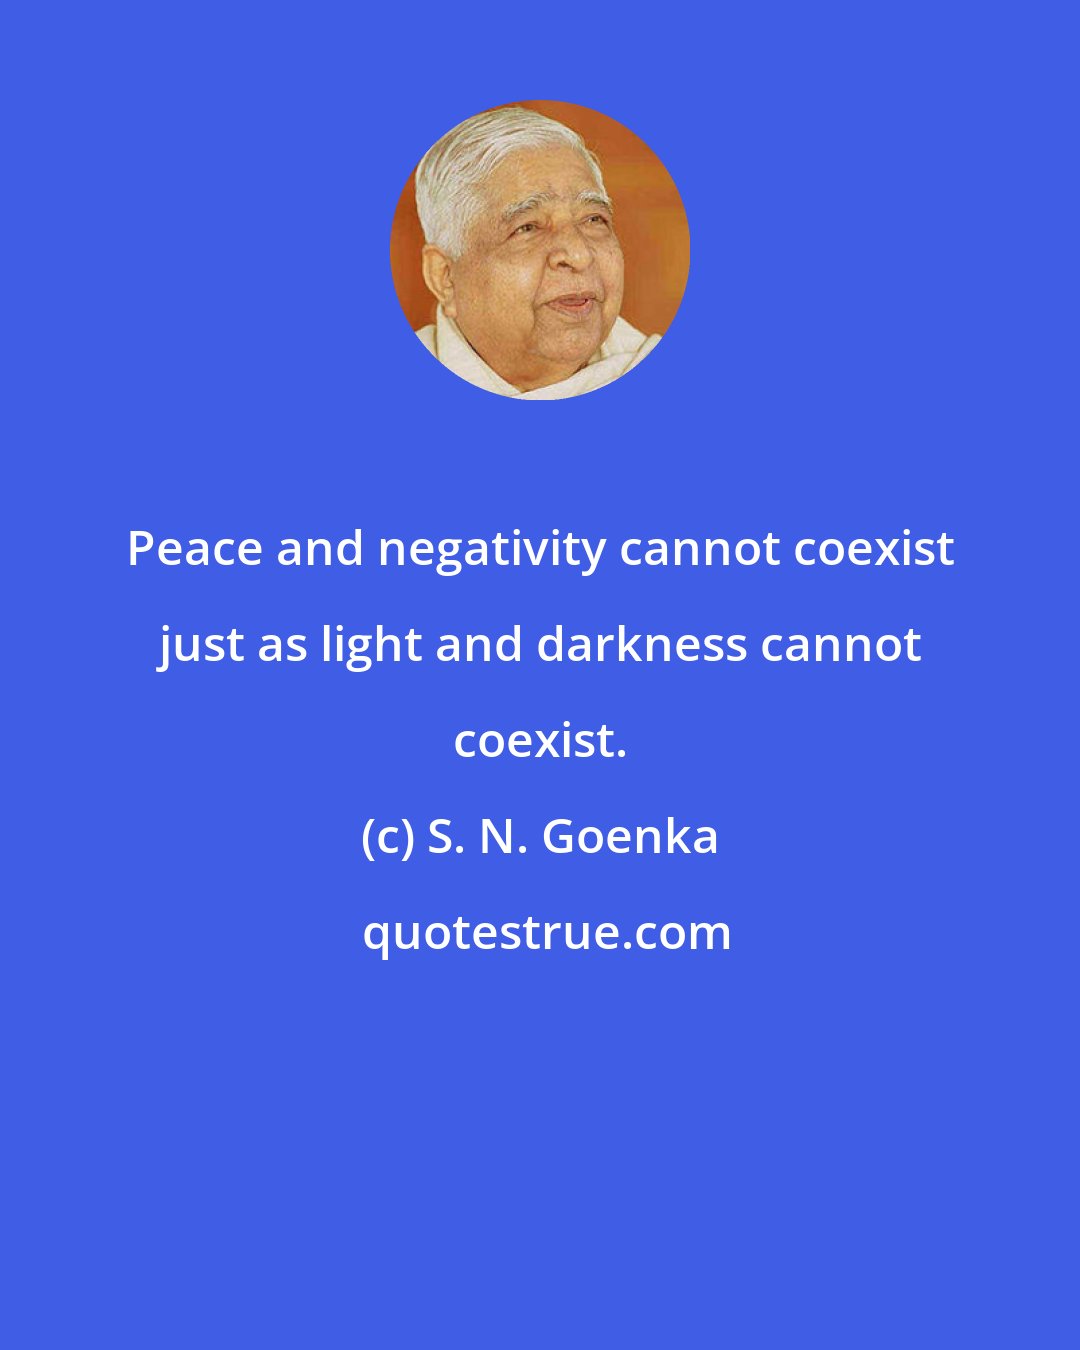 S. N. Goenka: Peace and negativity cannot coexist just as light and darkness cannot coexist.